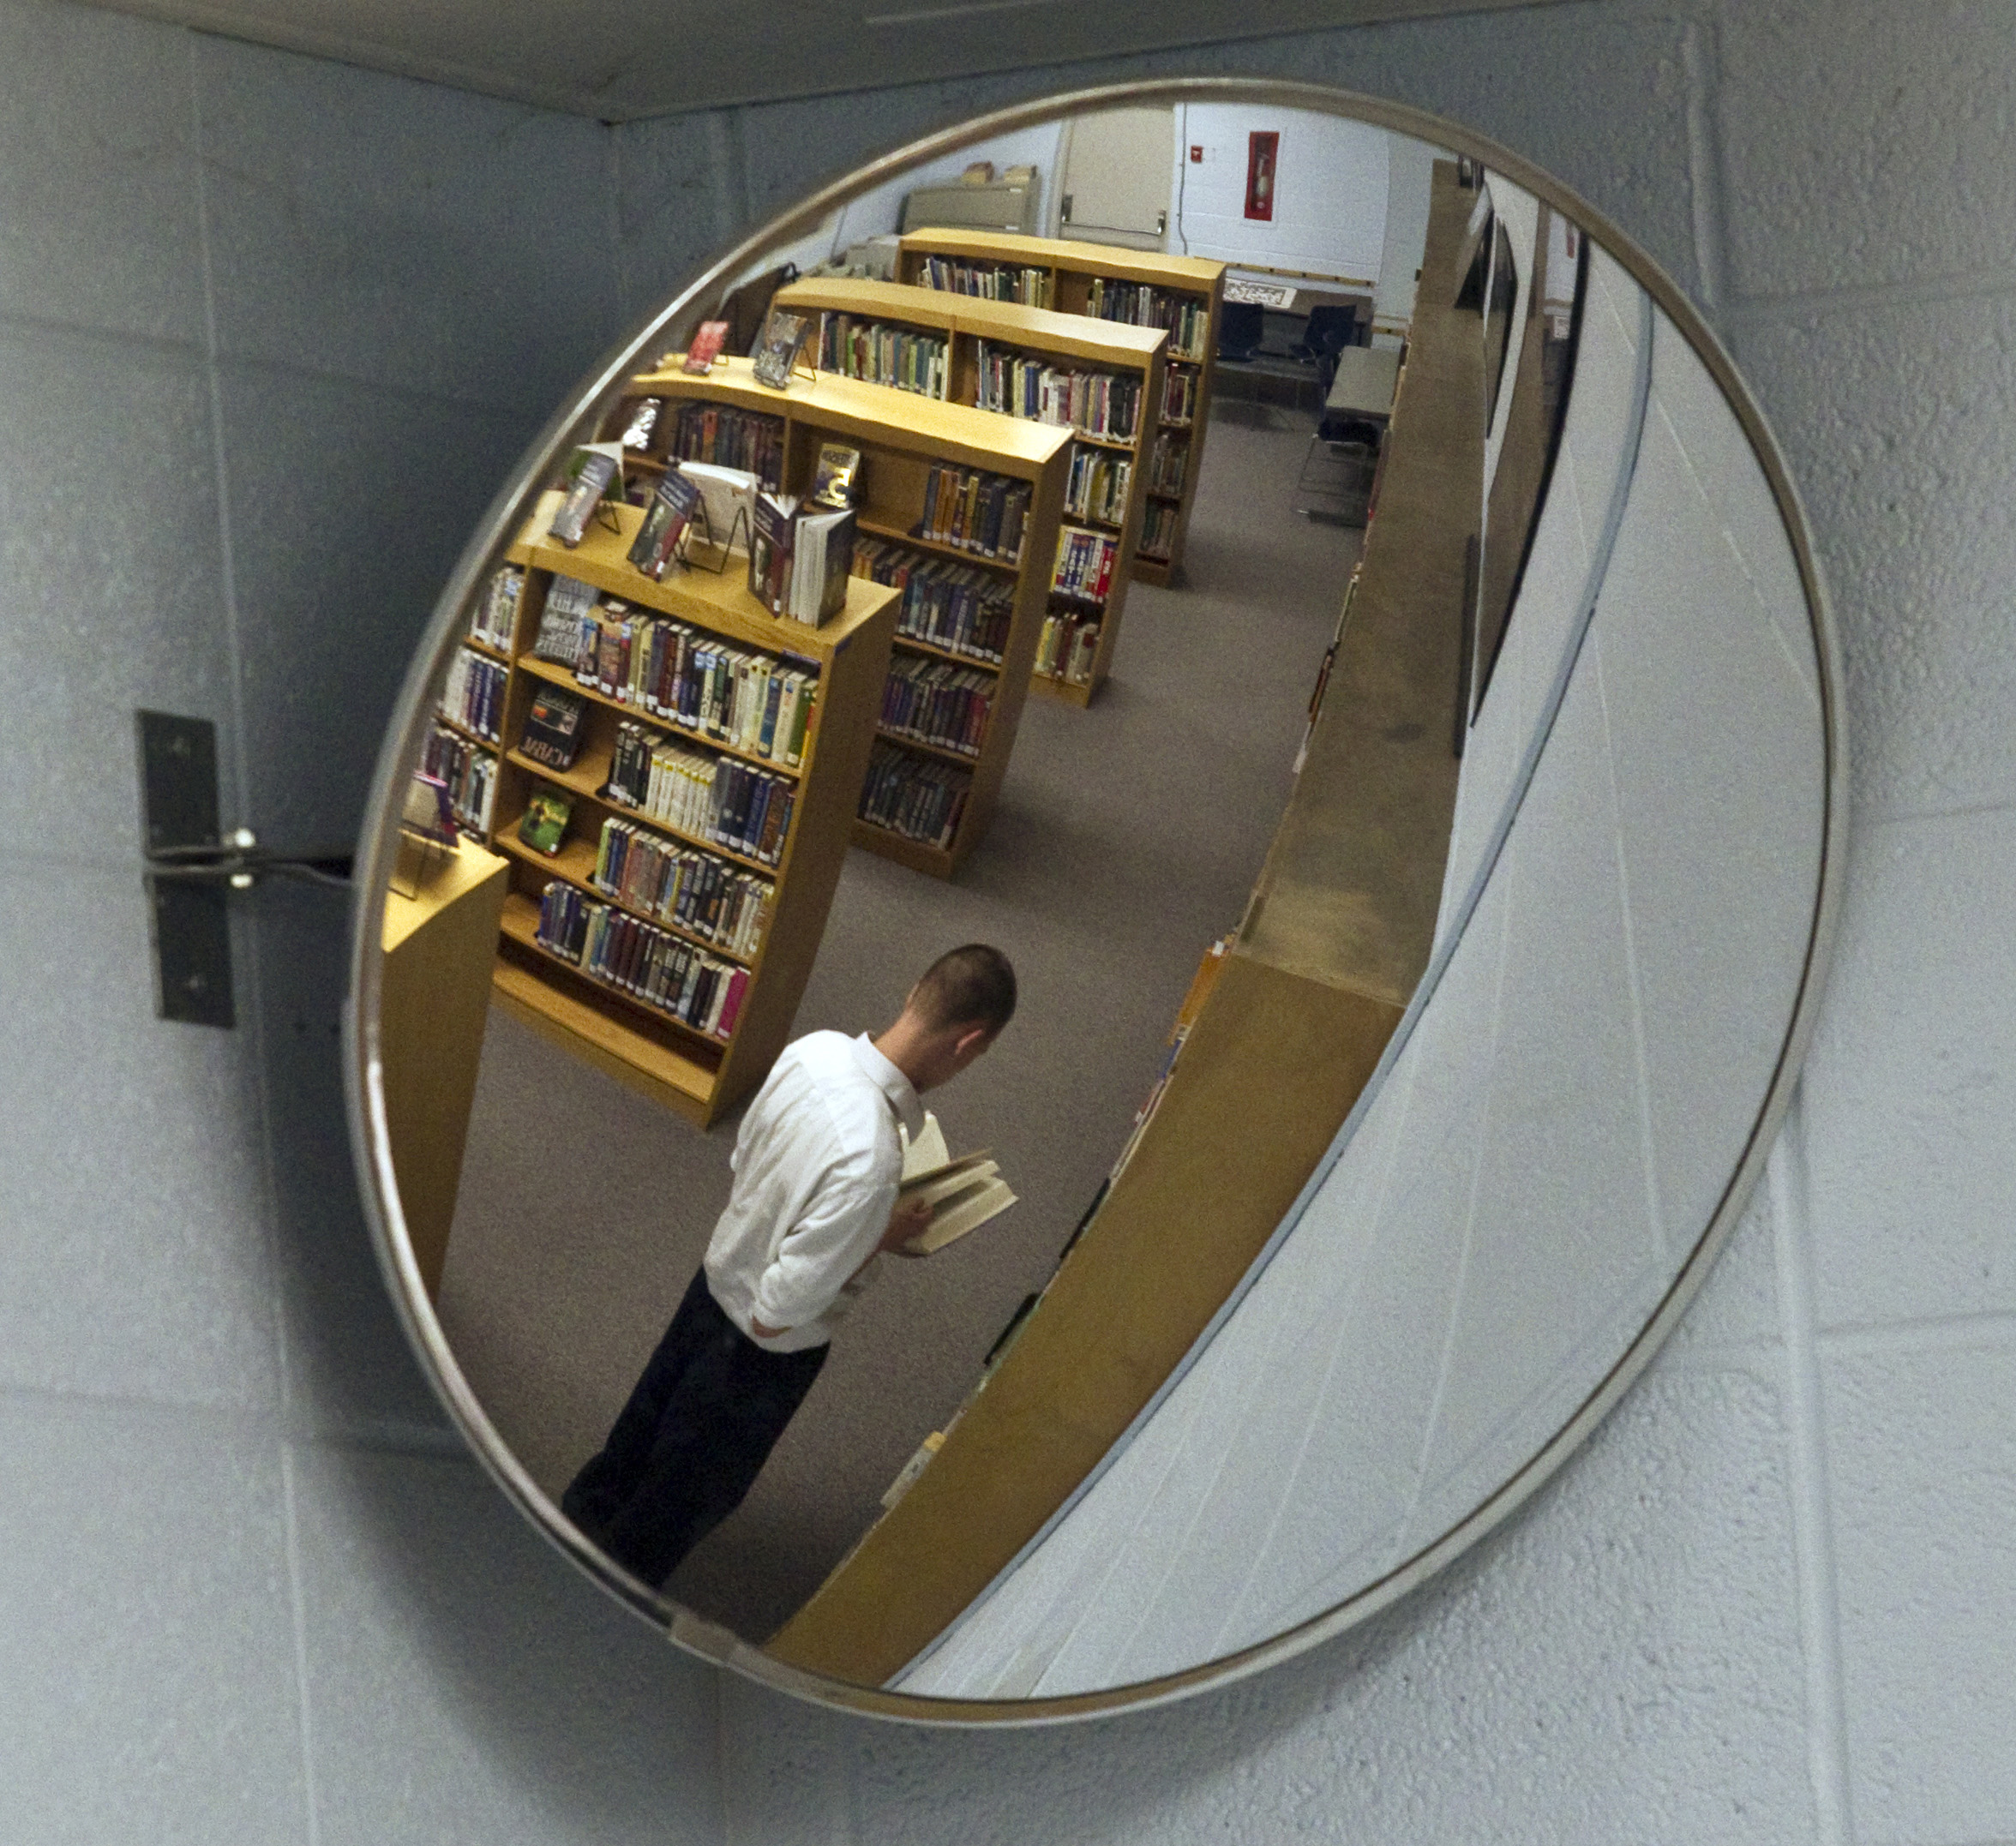 In this May 20, 2010 photo, a youth is seen in a mirror in the library at the Wisconsin Department of Corrections Ethan Allen School Thursday, May 20, 2010, in Wales, Wis. States across the country are shutting down dozens of youth prisons like Ethan Allen School.